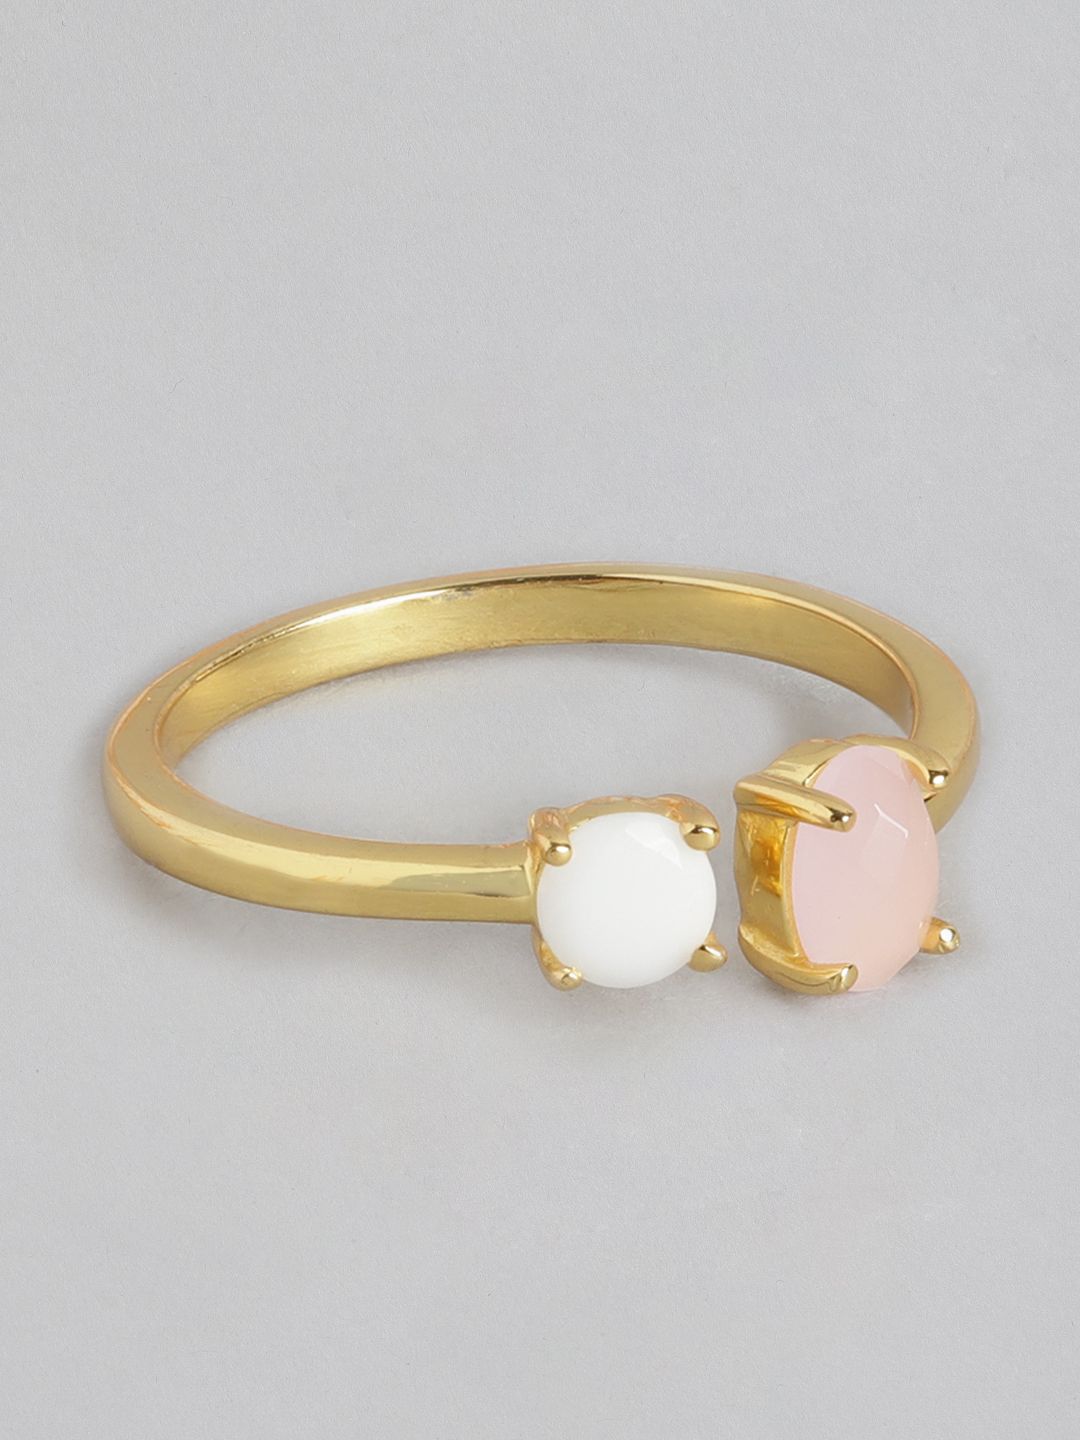 Carlton London Pink Gold-Plated Beaded Adjustable Ring Price in India